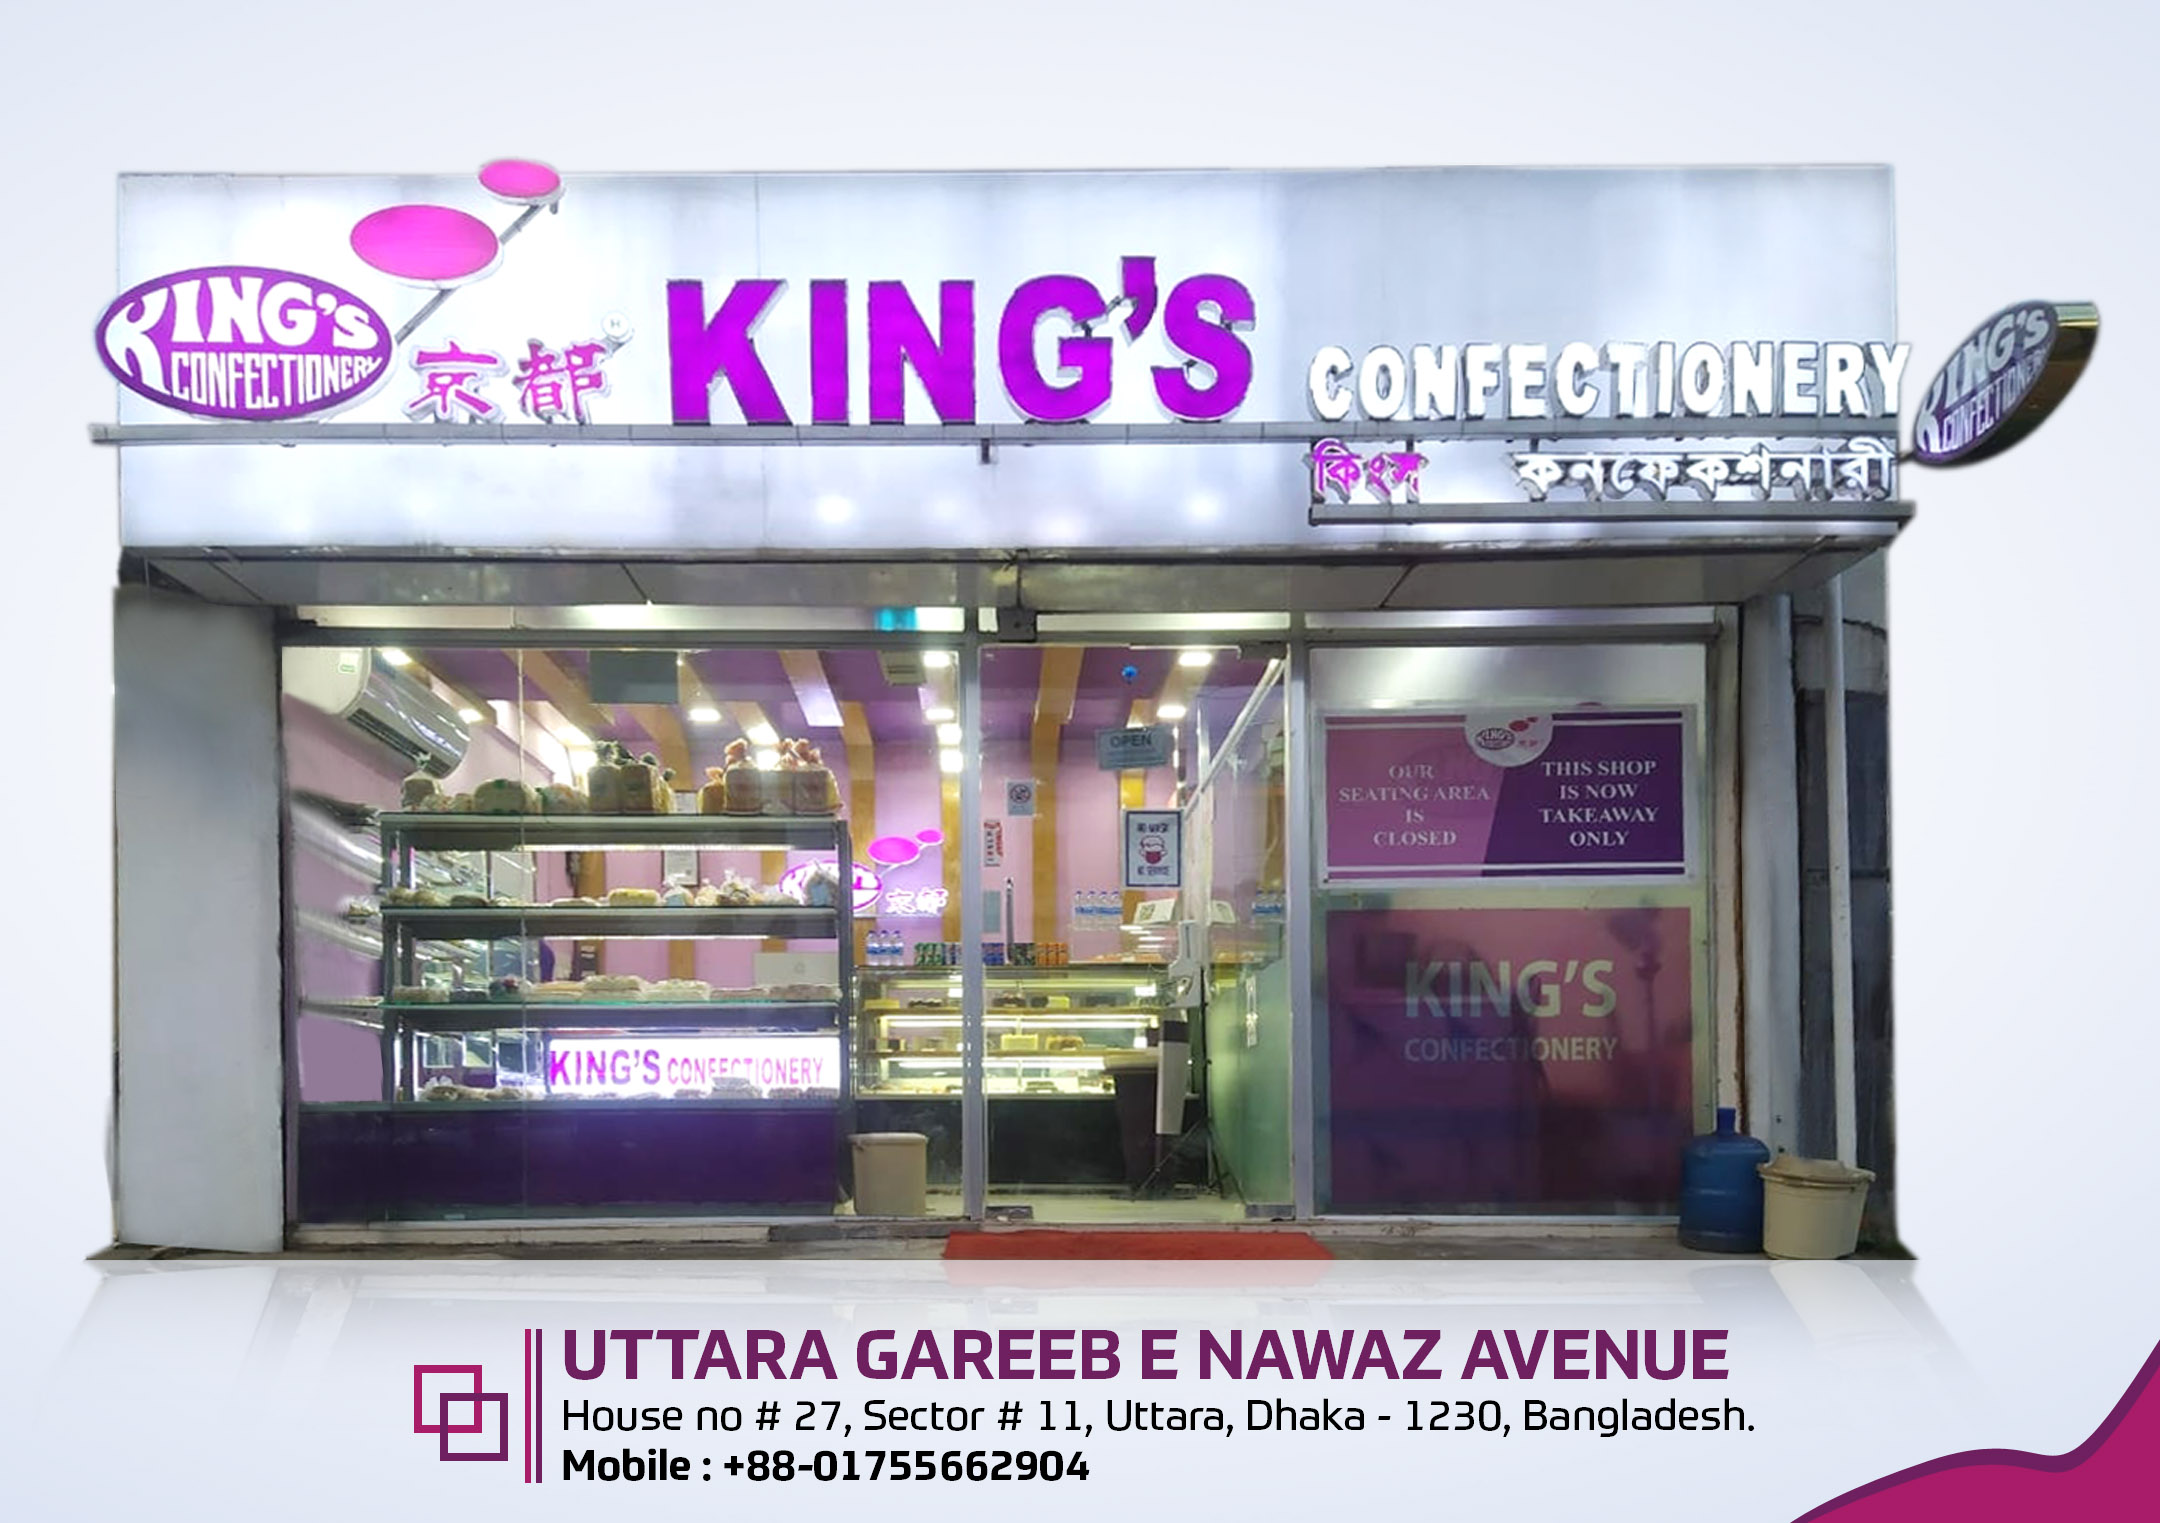 King's Confectionery, Uttara(Sector # 11)